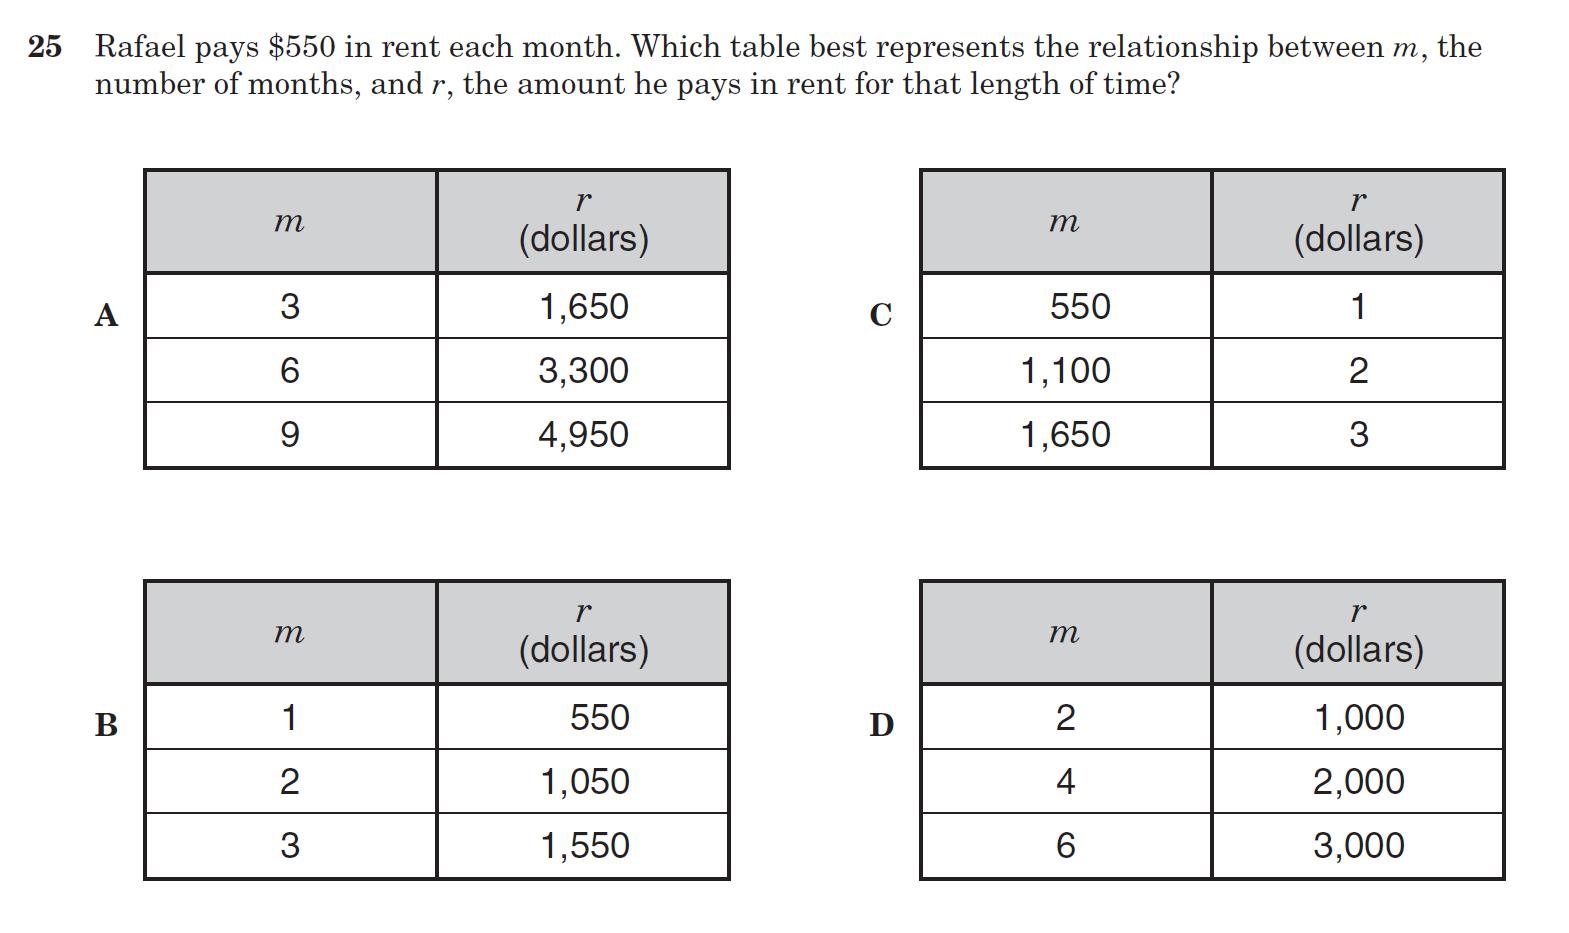 Proportional And Nonproportional Relationships Worksheet